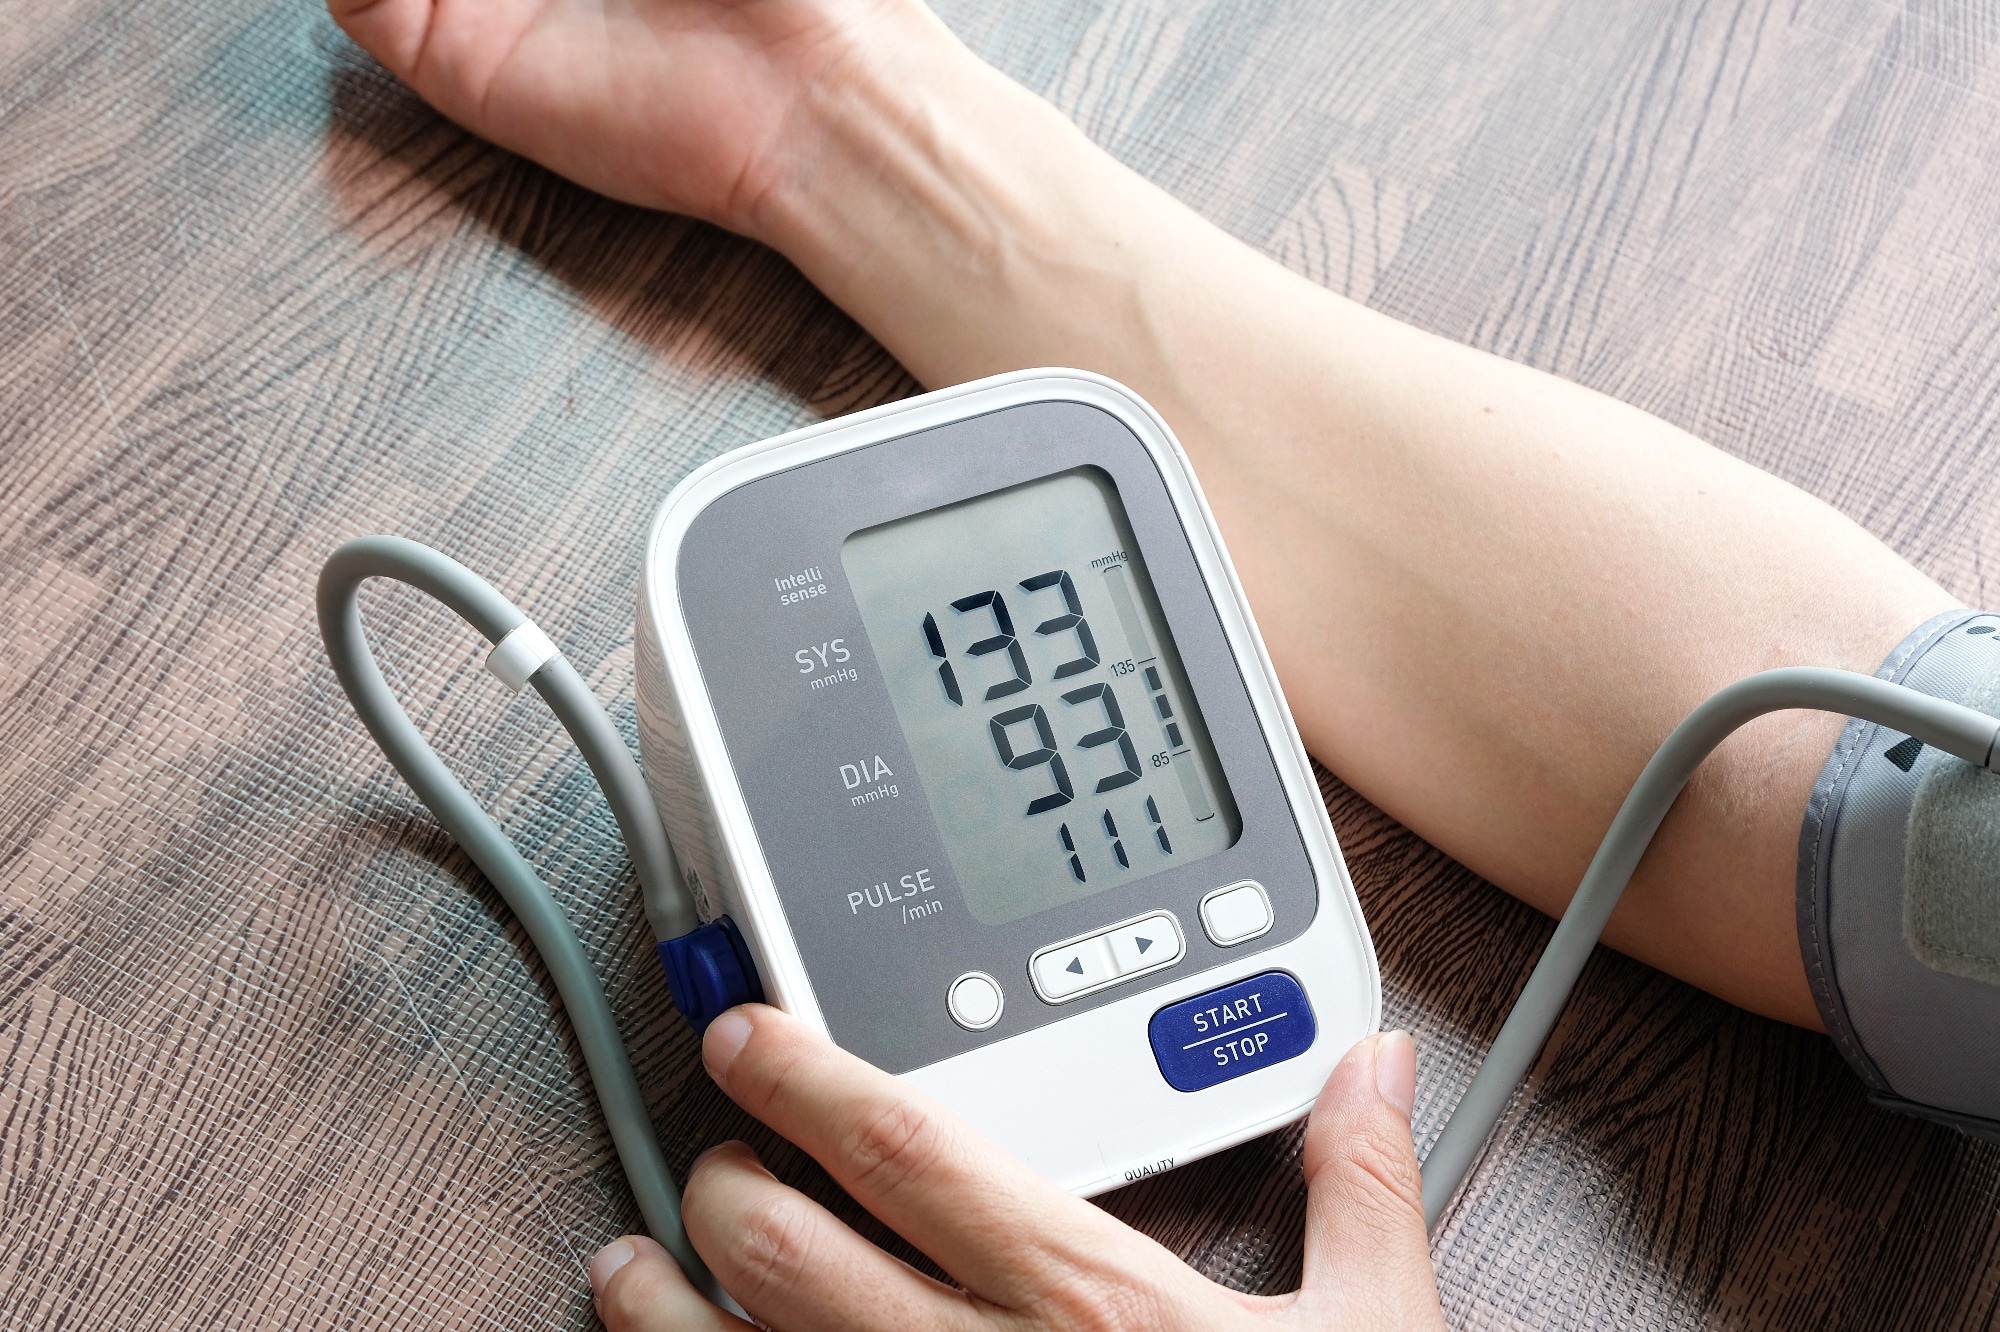 Study: Changes in Blood Pressure Outcomes Among Hypertensive Individuals During the COVID-19 Pandemic: A Time Series Analysis in Three US Healthcare Organizations. Image Credit: Me dia / Shutterstock